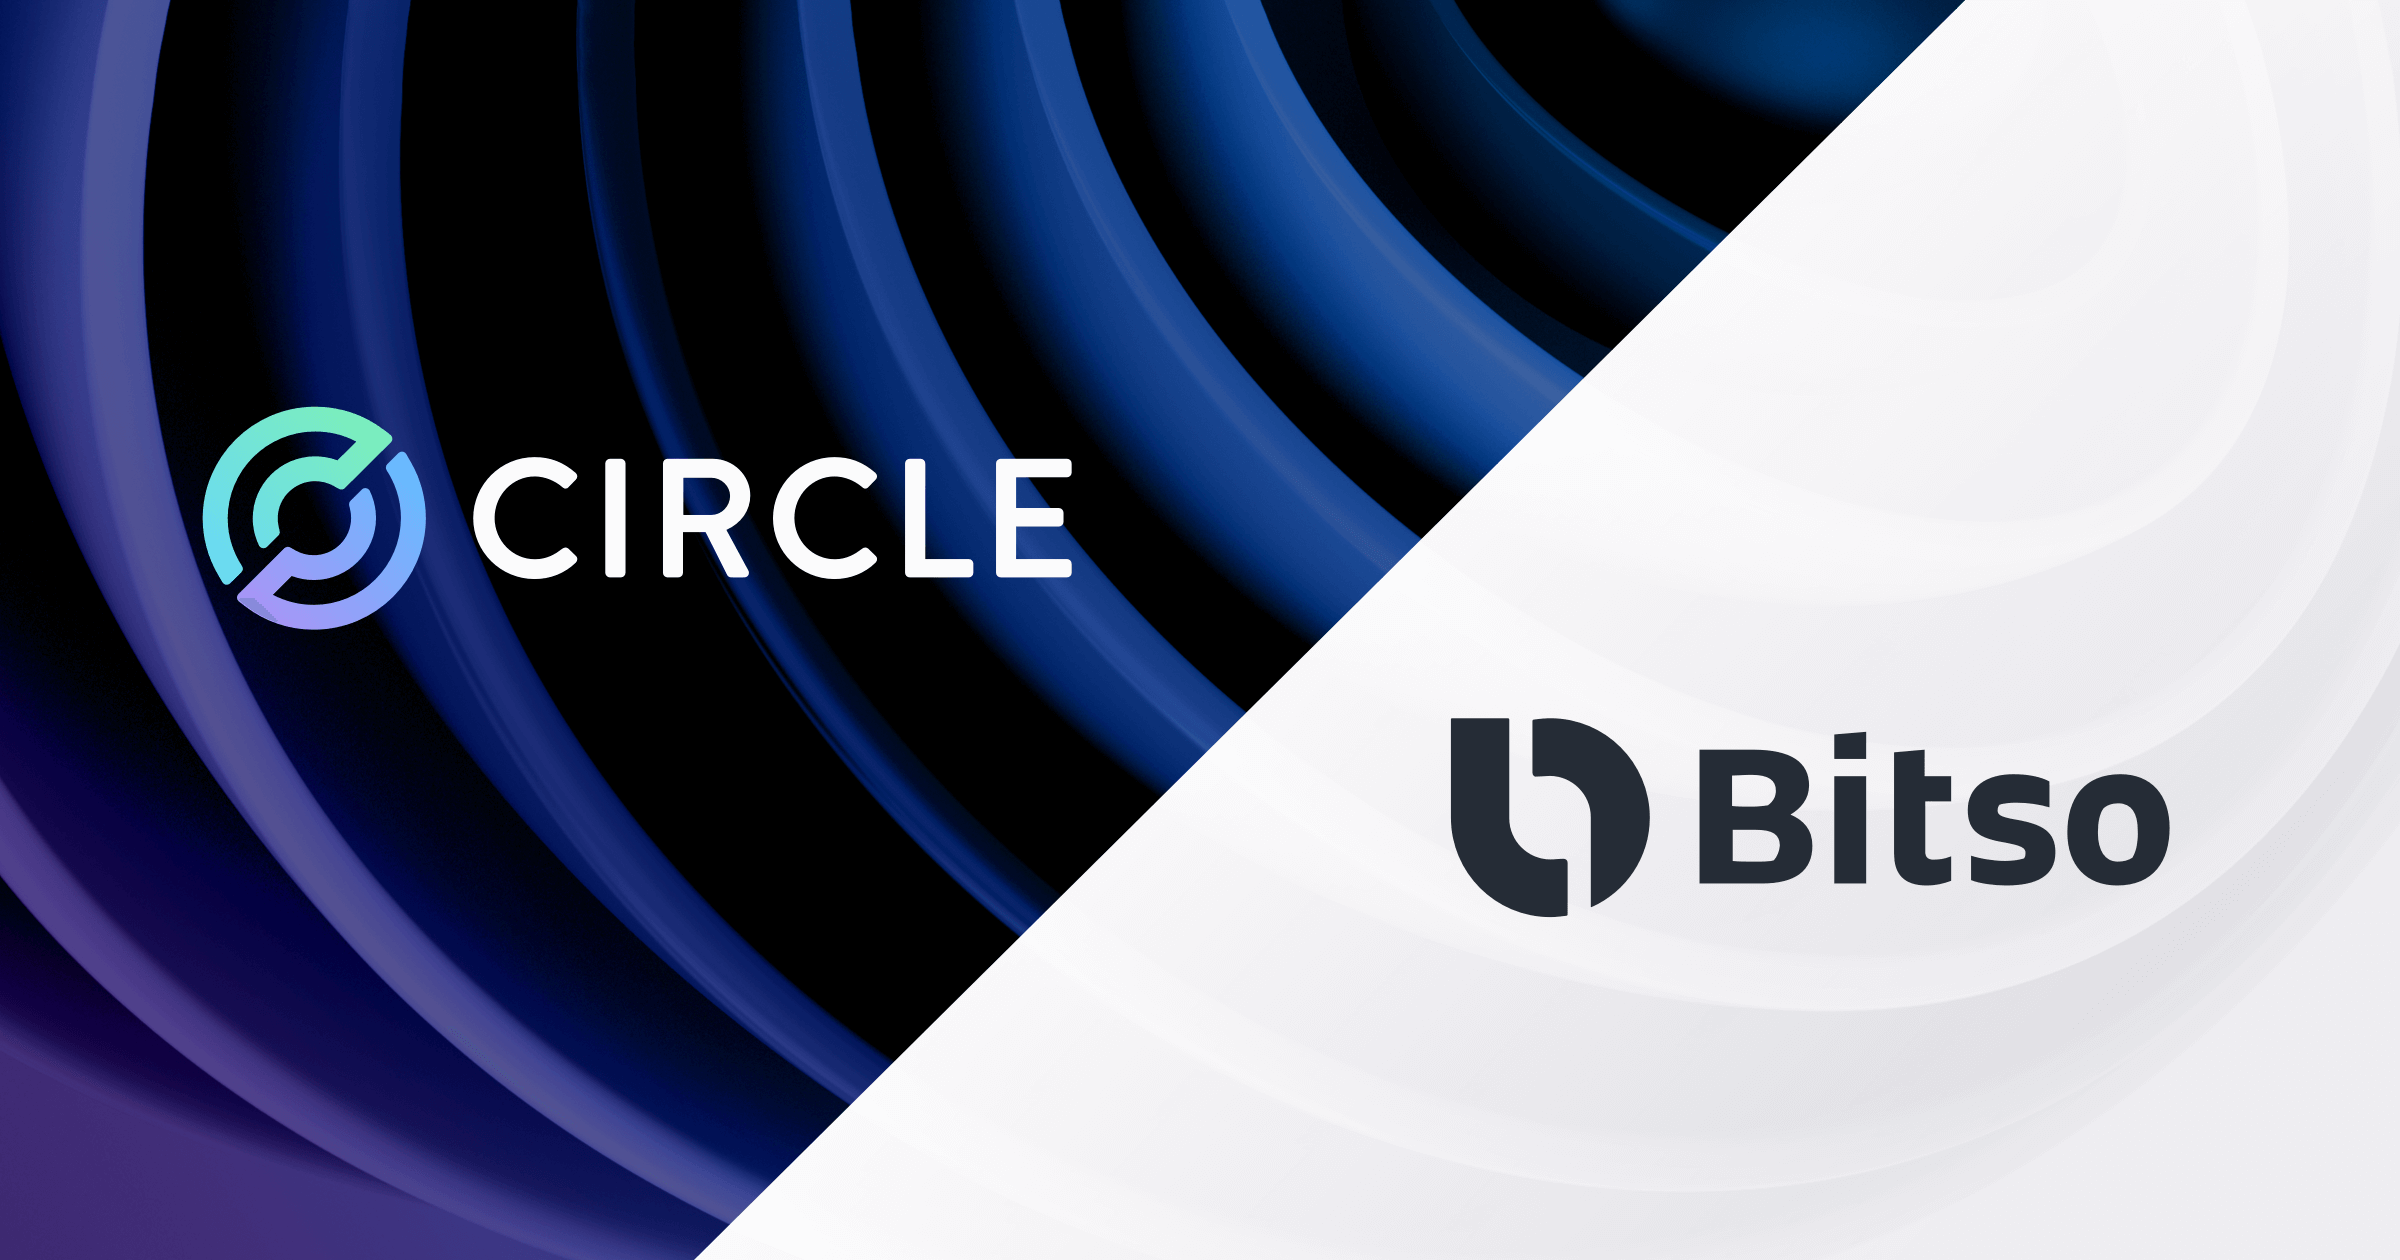 Circle Powers First Blockchain-Powered, Cross-Border Payment Platform Between U.S. and Mexico